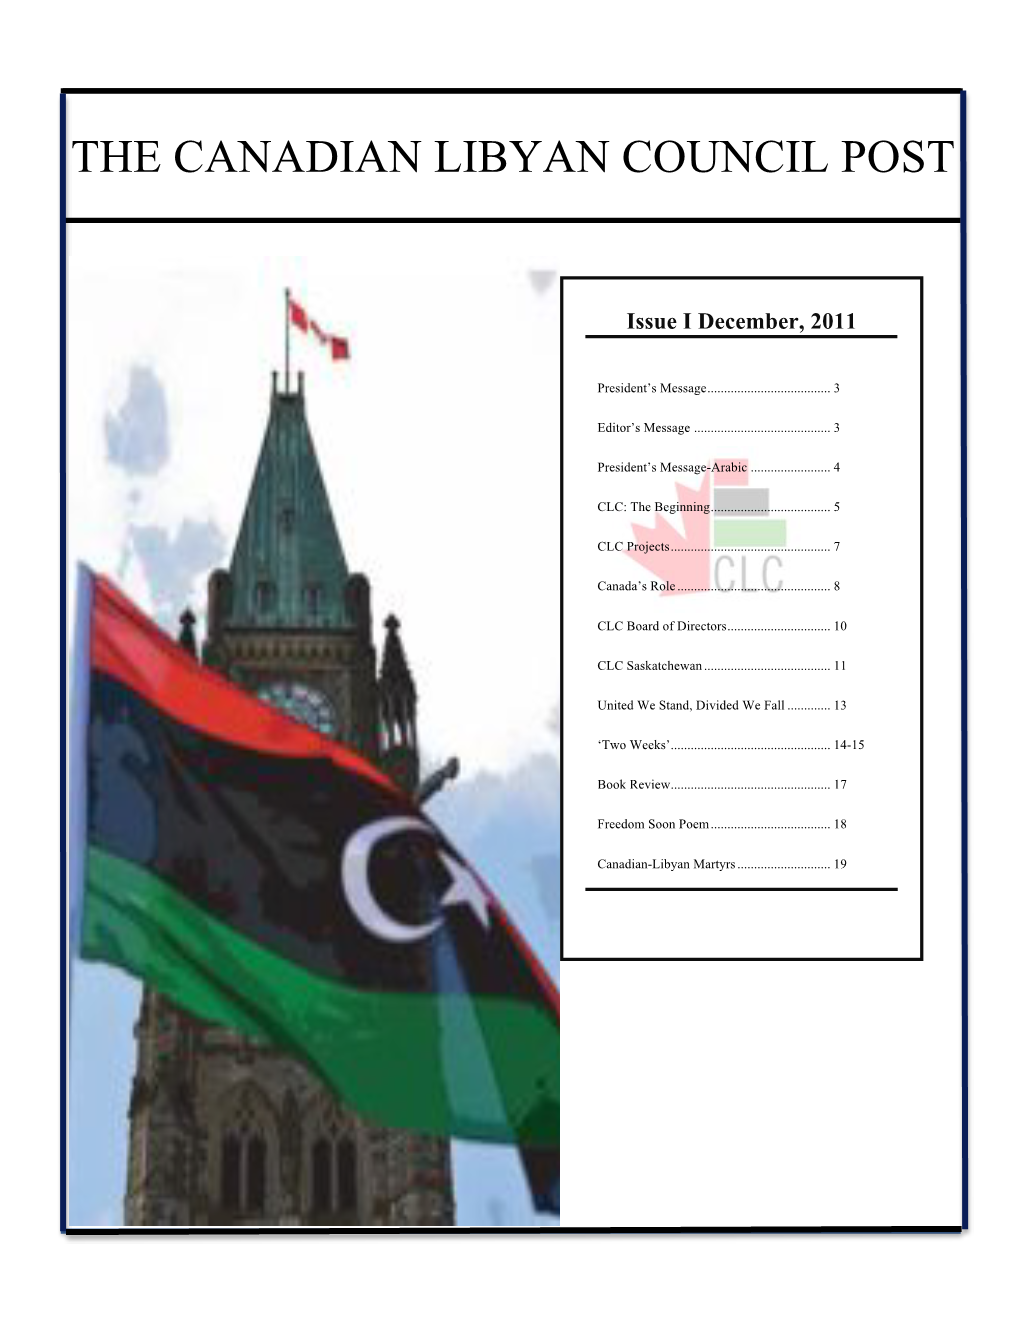 The Canadian Libyan Council Post